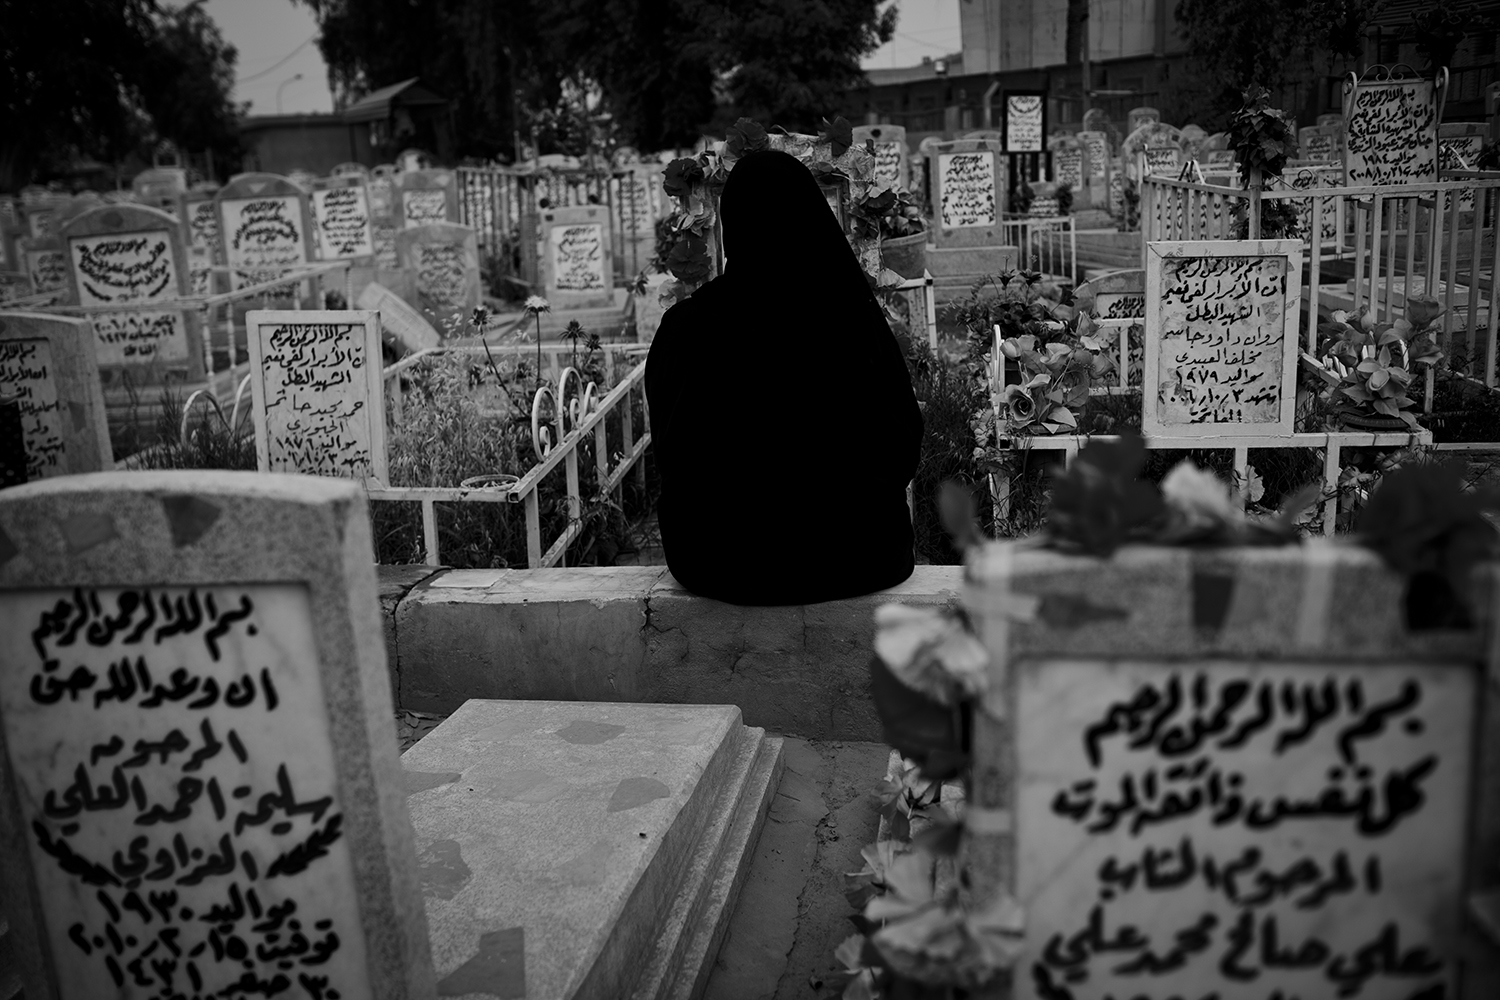 Apr. 18, 2012. Baghdad. A woman prays at the cemetery for her dead son.